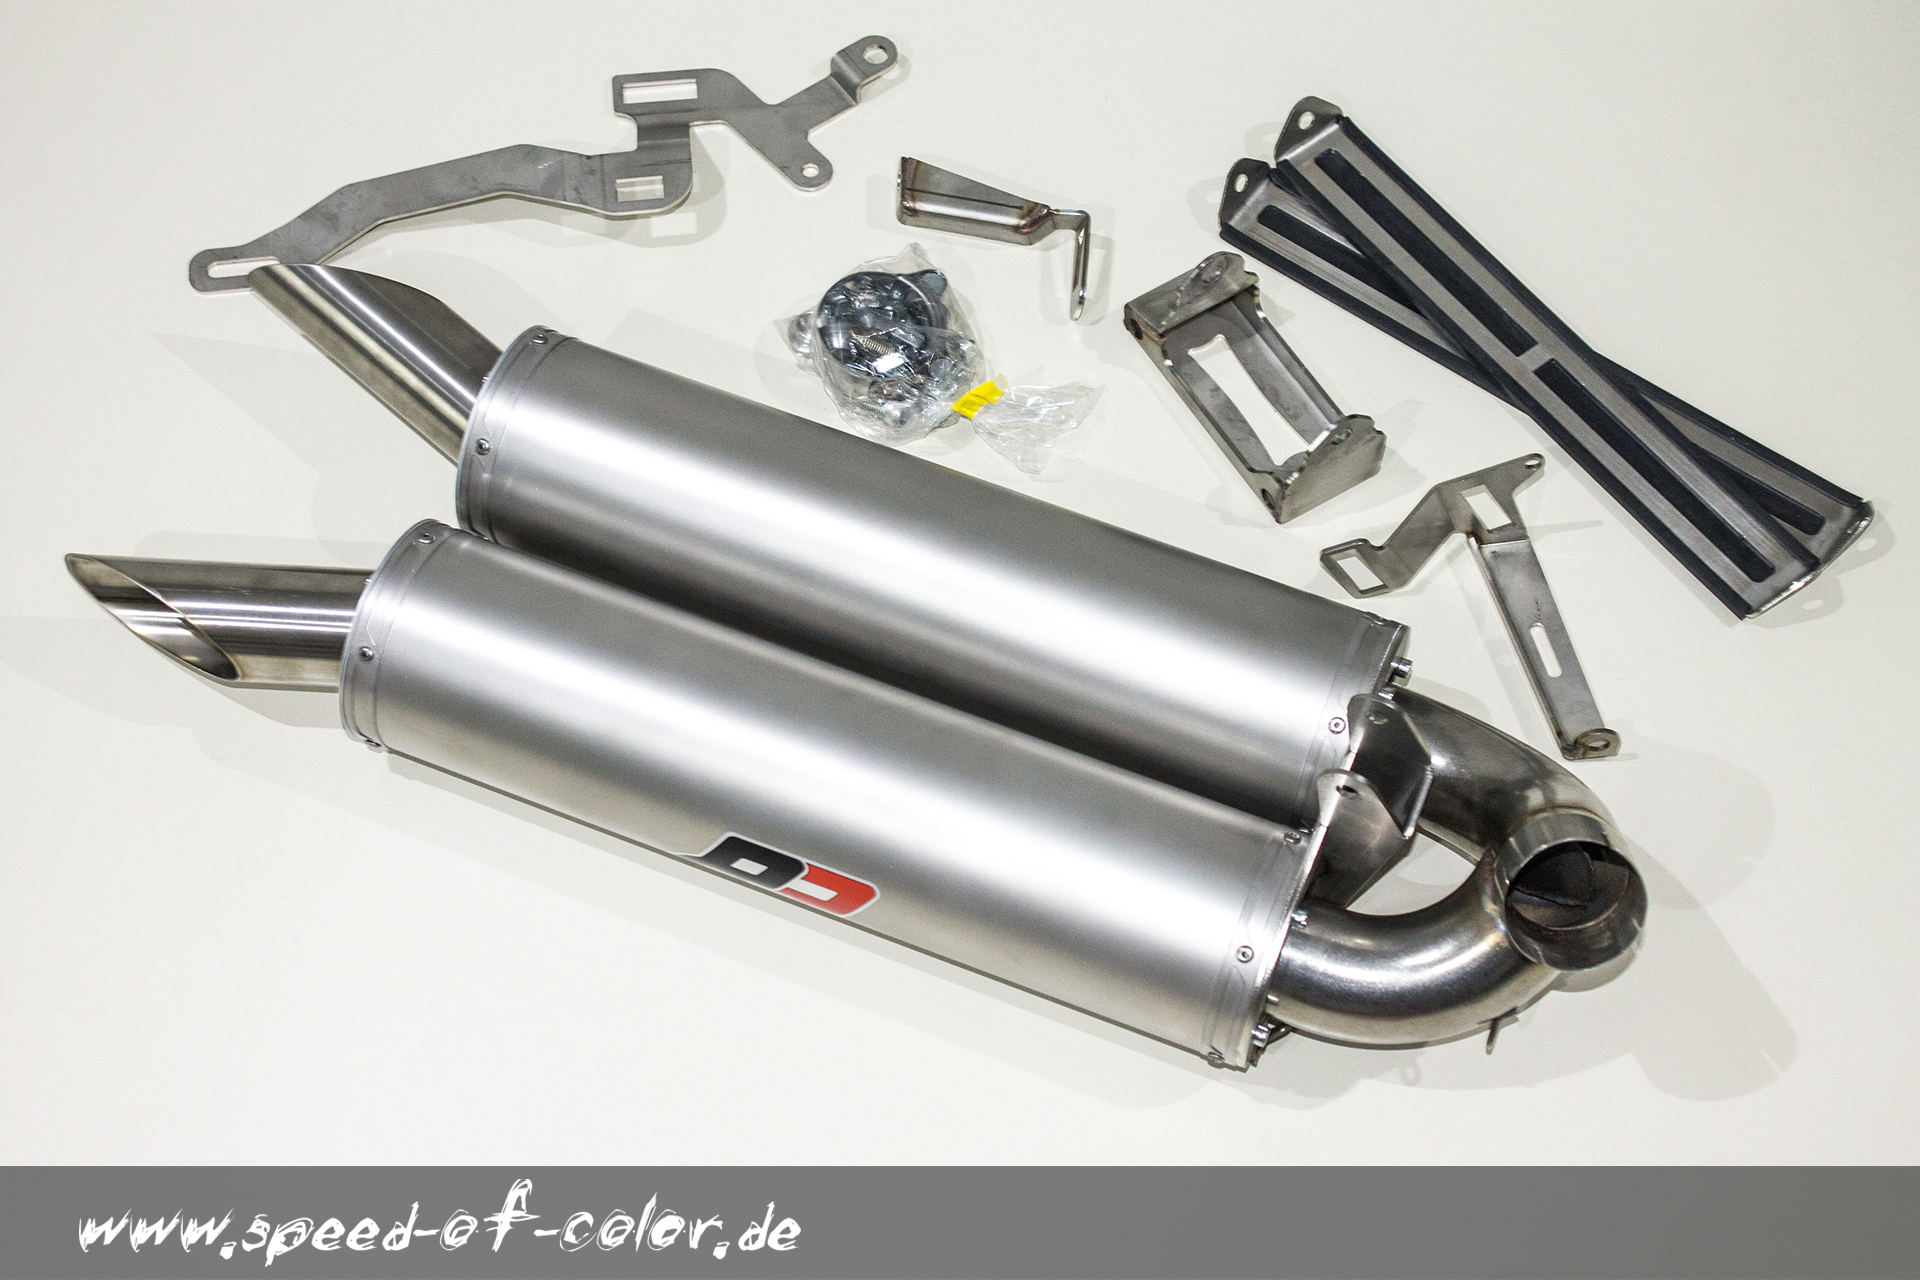 QUAT-D exhaust Buell XB | SPEED of COLOR